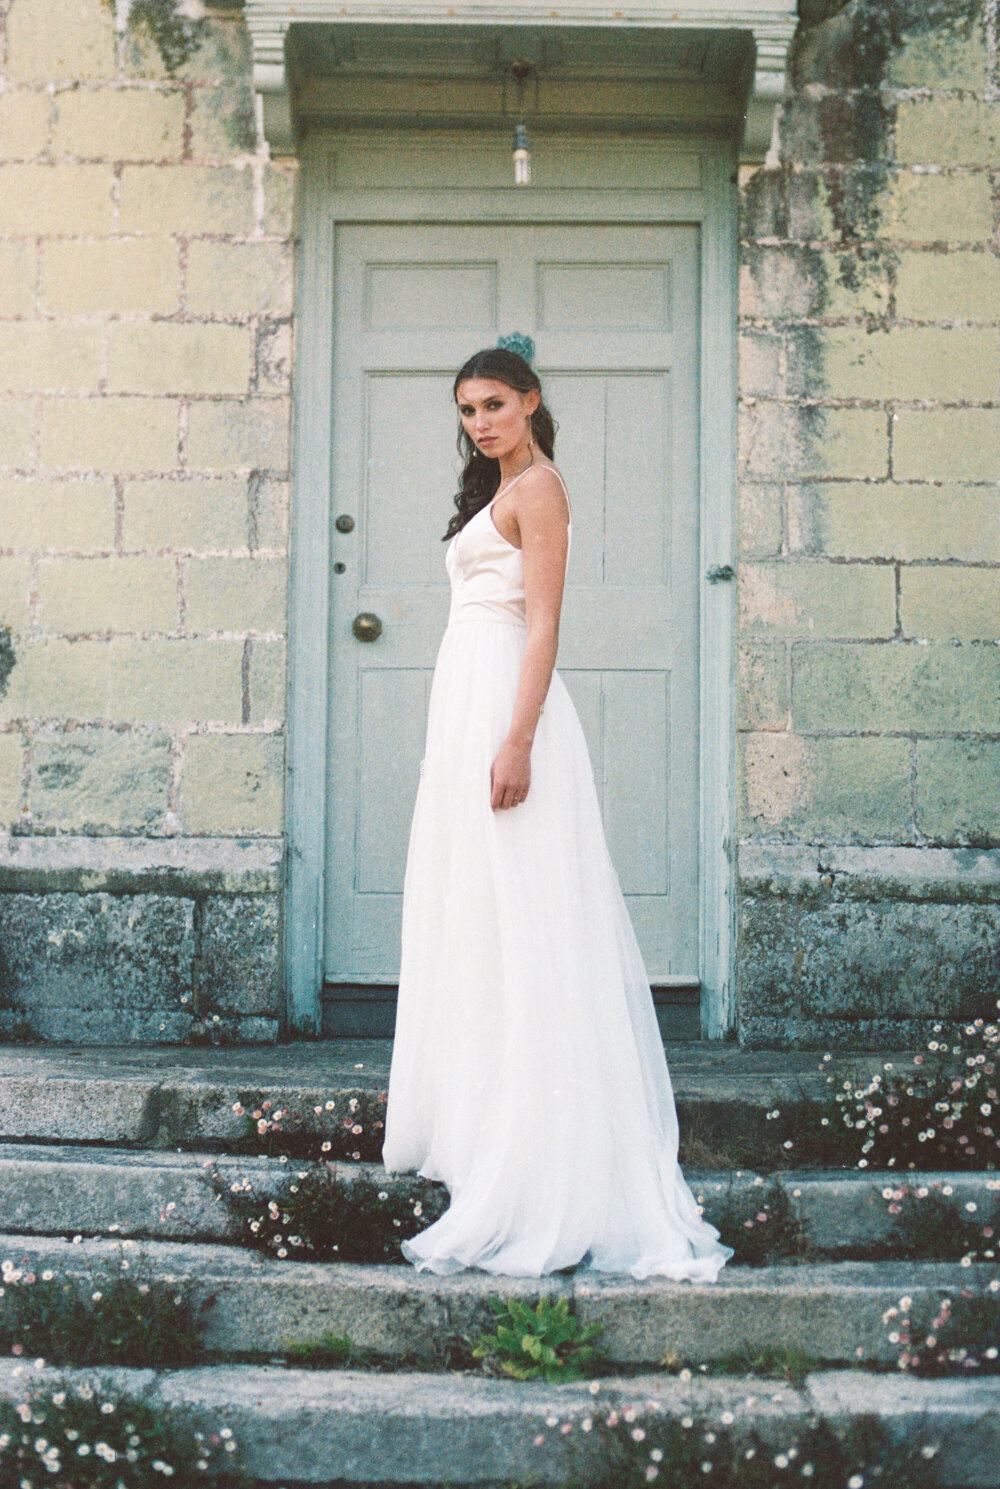 The Vault: Curated & Refined Wedding Inspiration | Bridal photography,  Bride, Bridal shoot